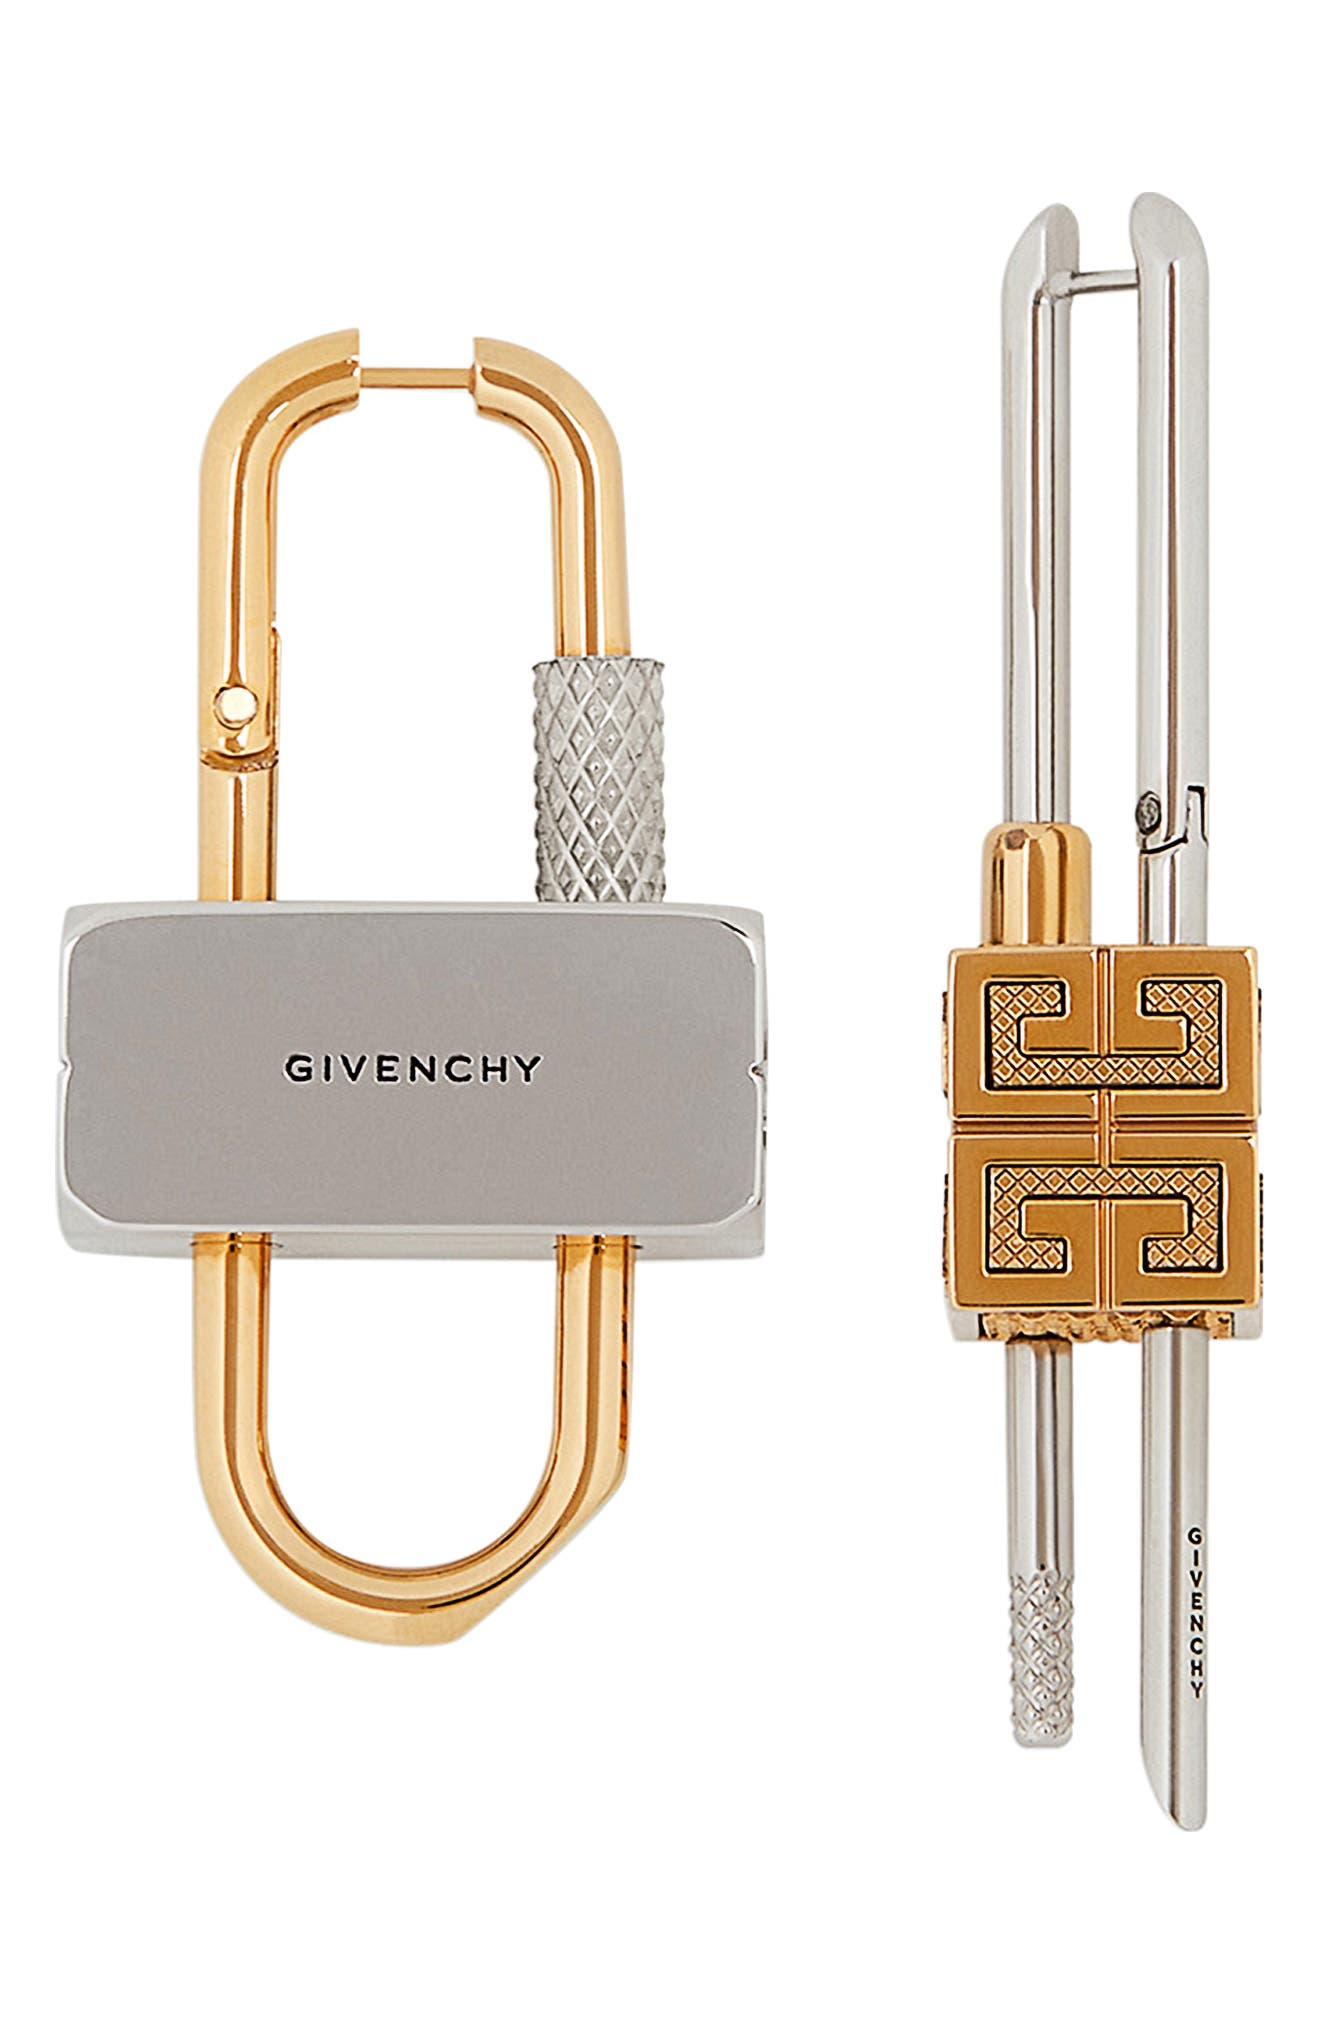 nordstrom givenchy jewelry